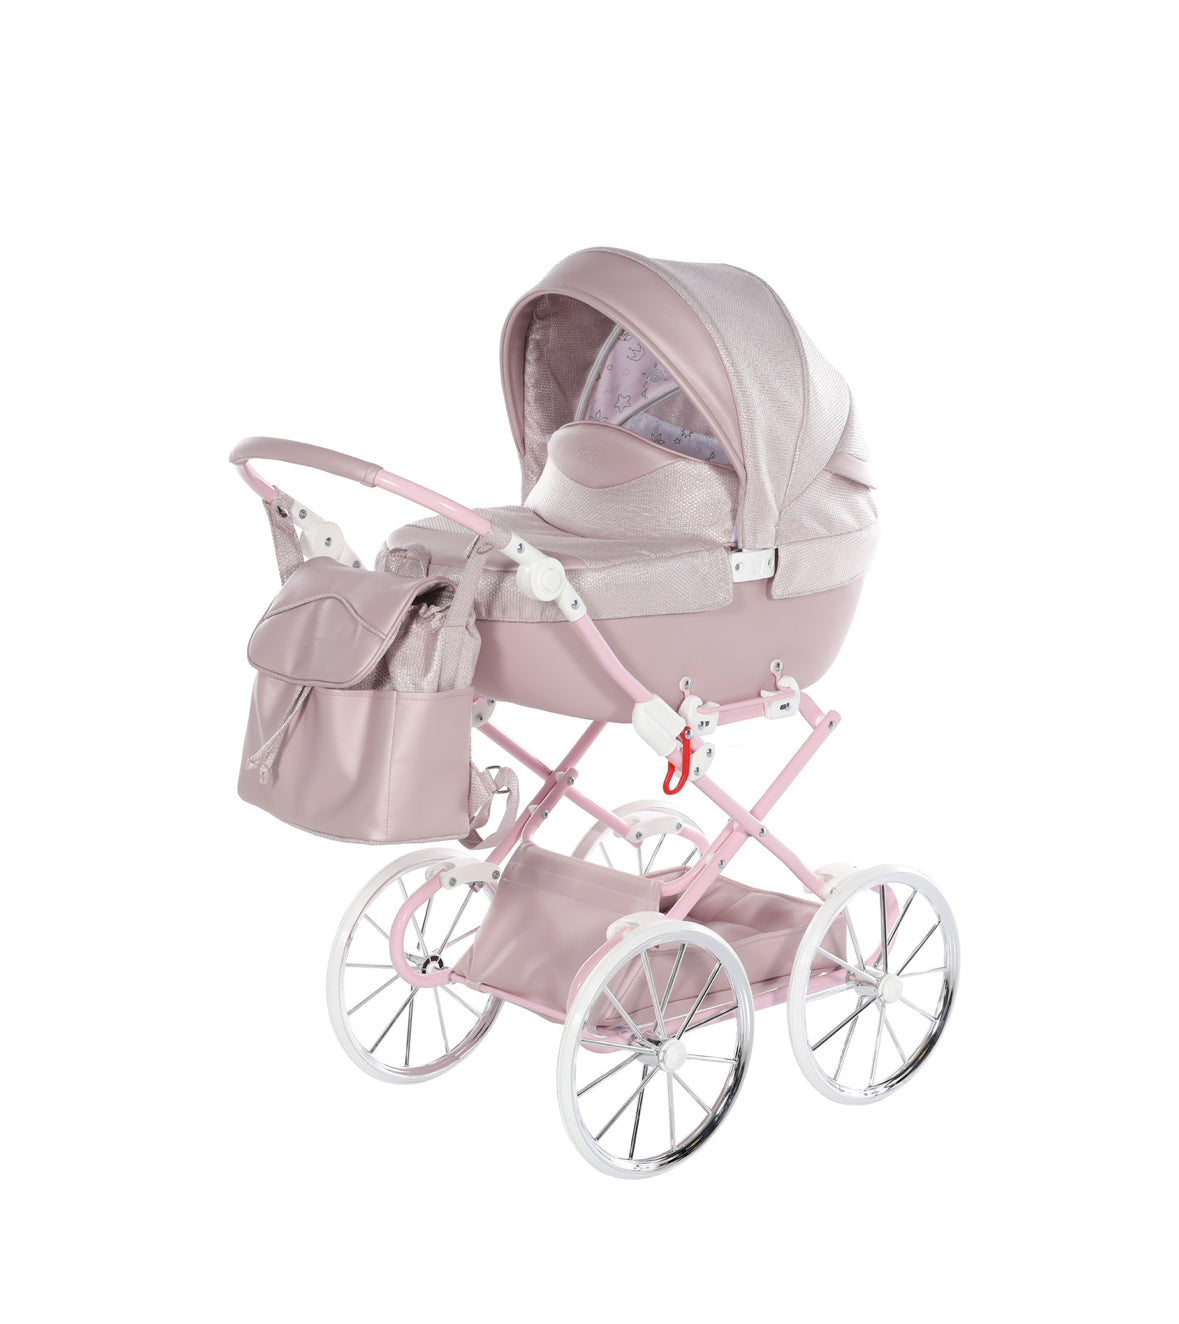 DOLCE PINK DOLL'S PRAM - Up to 21 days delivery!